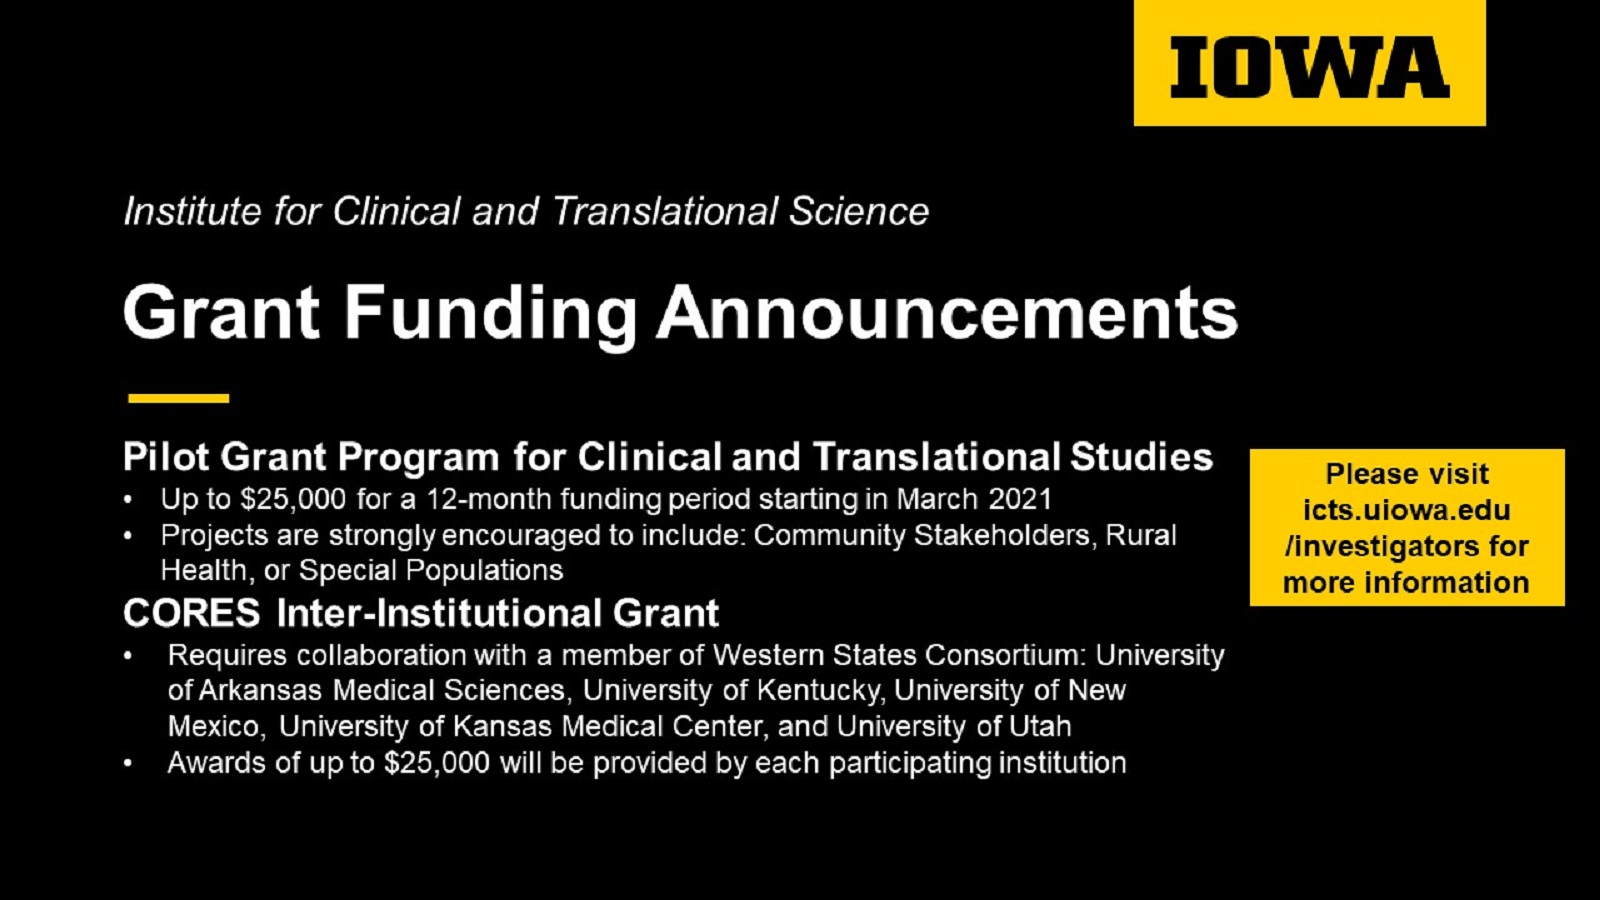 ICTS Grant Funding Announcements - January 2021